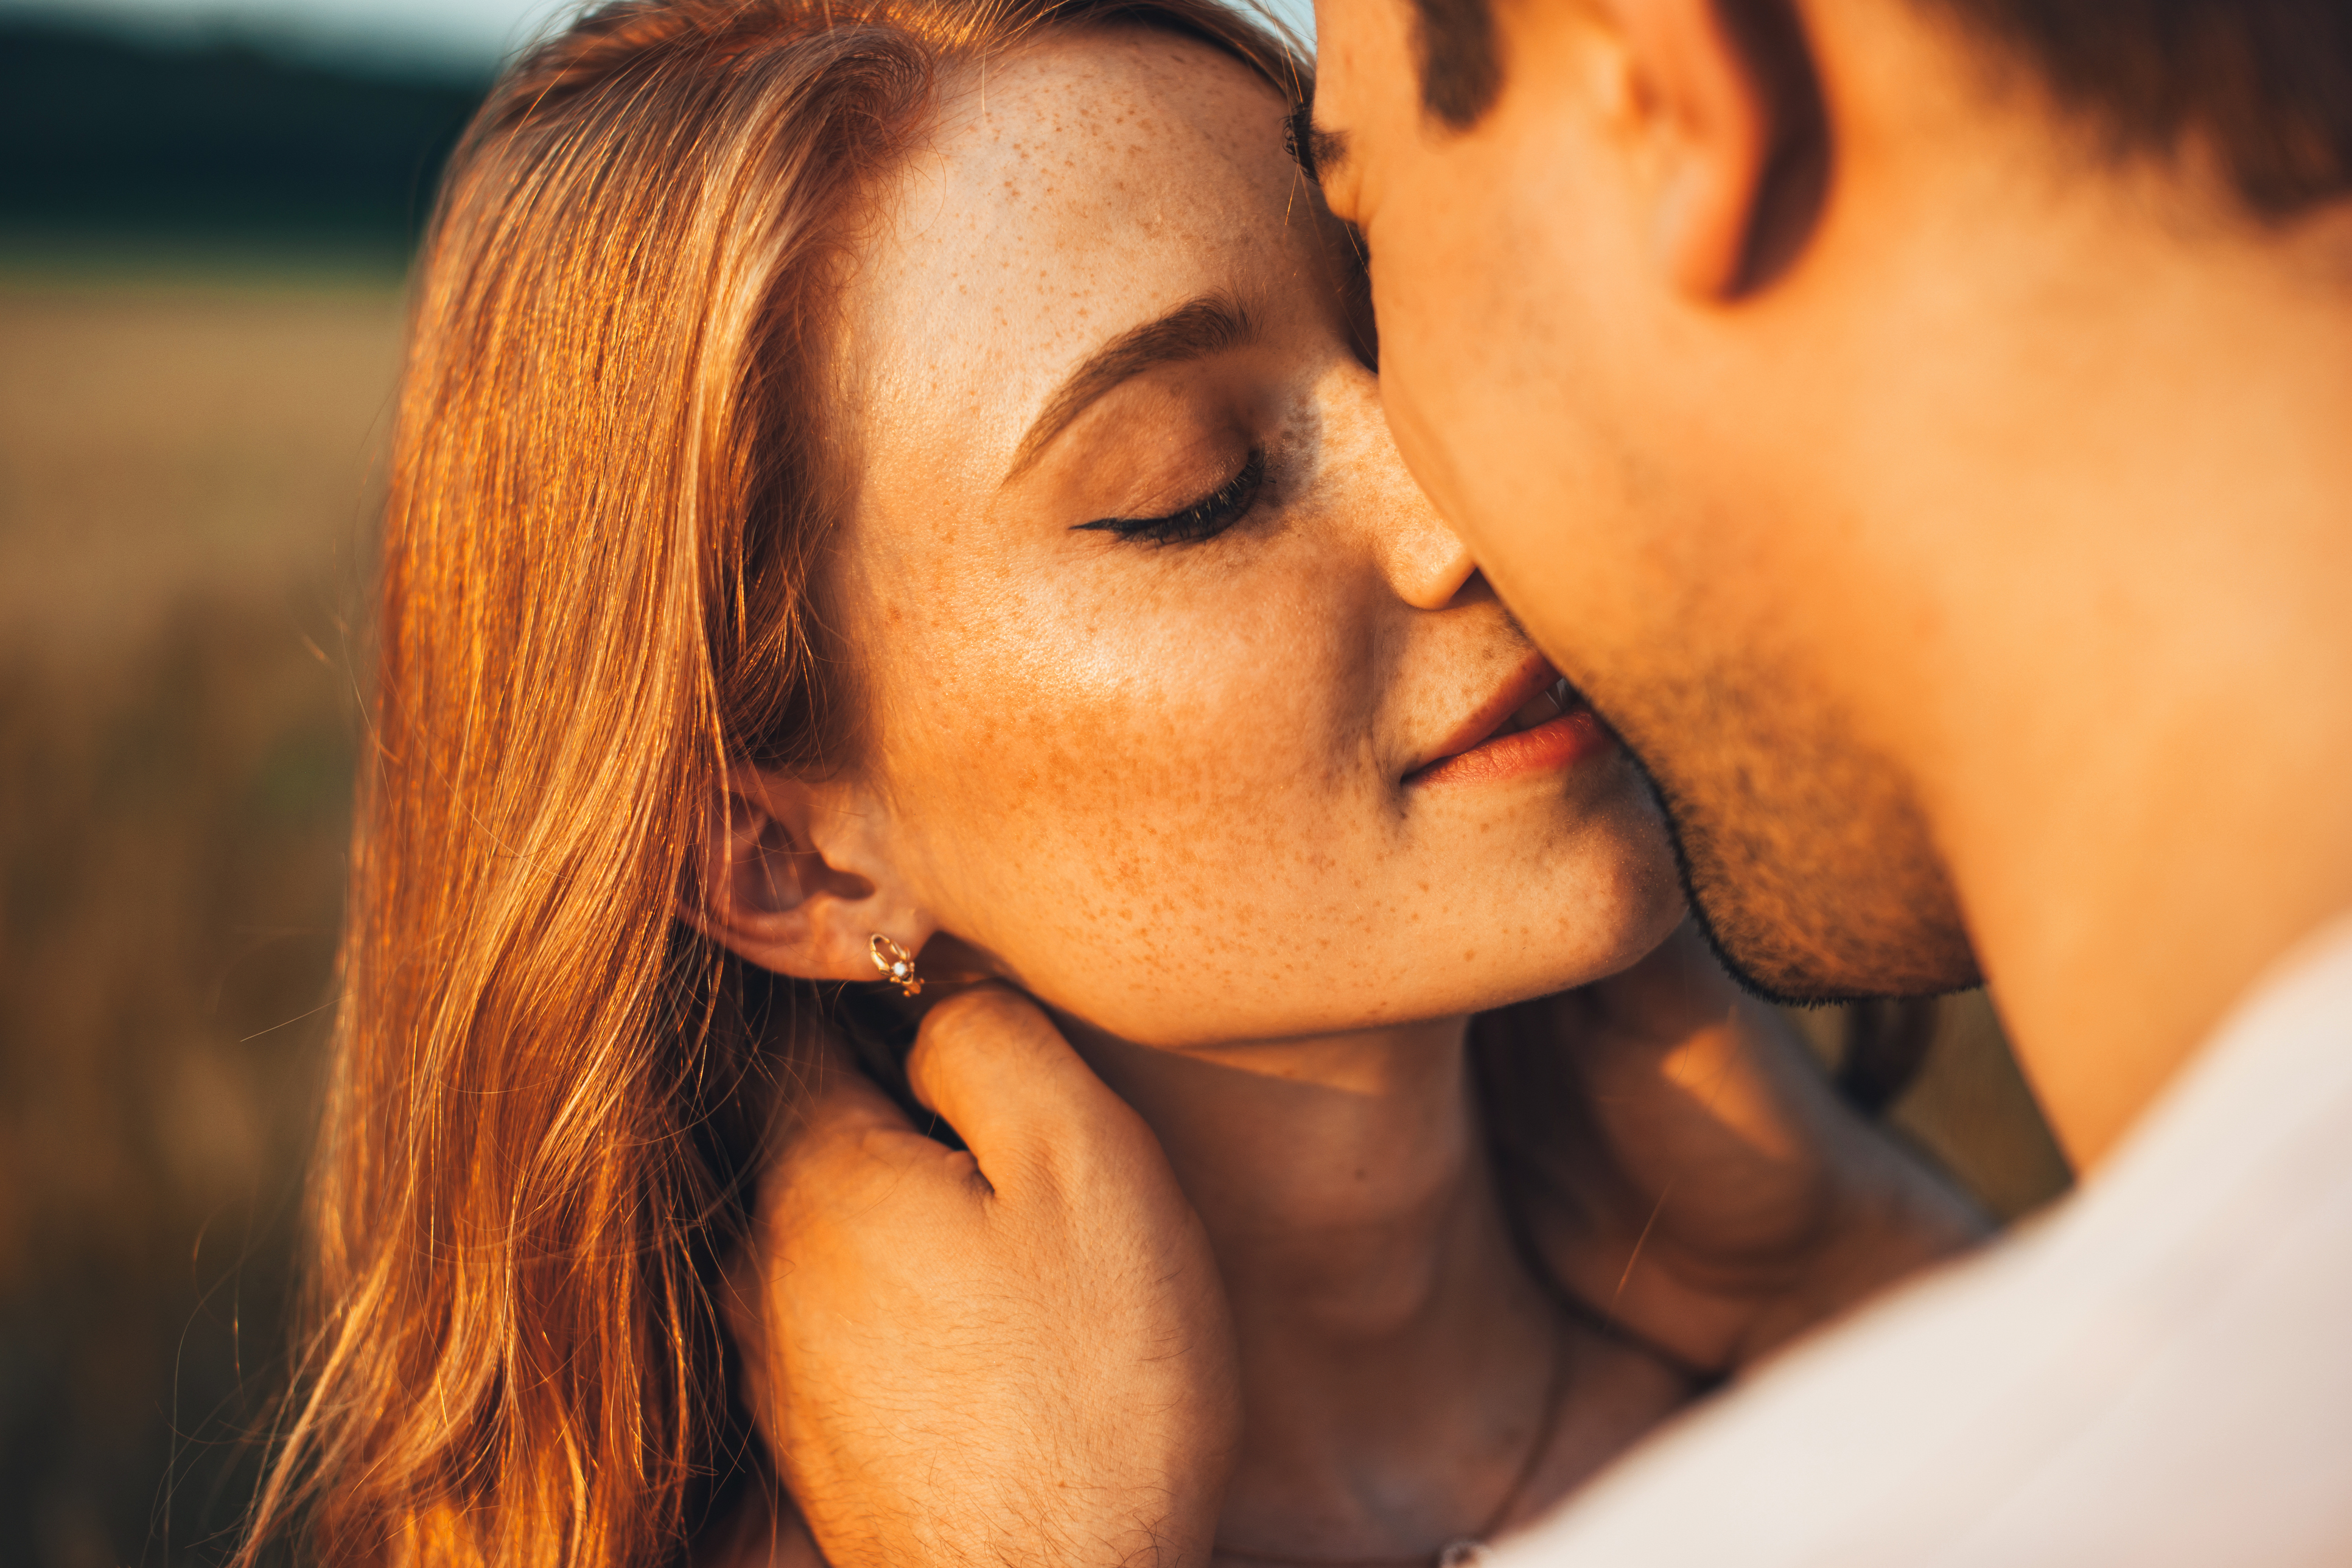 How To Kiss A Girl That I Am Romantically Interested In And Want To Go Out With